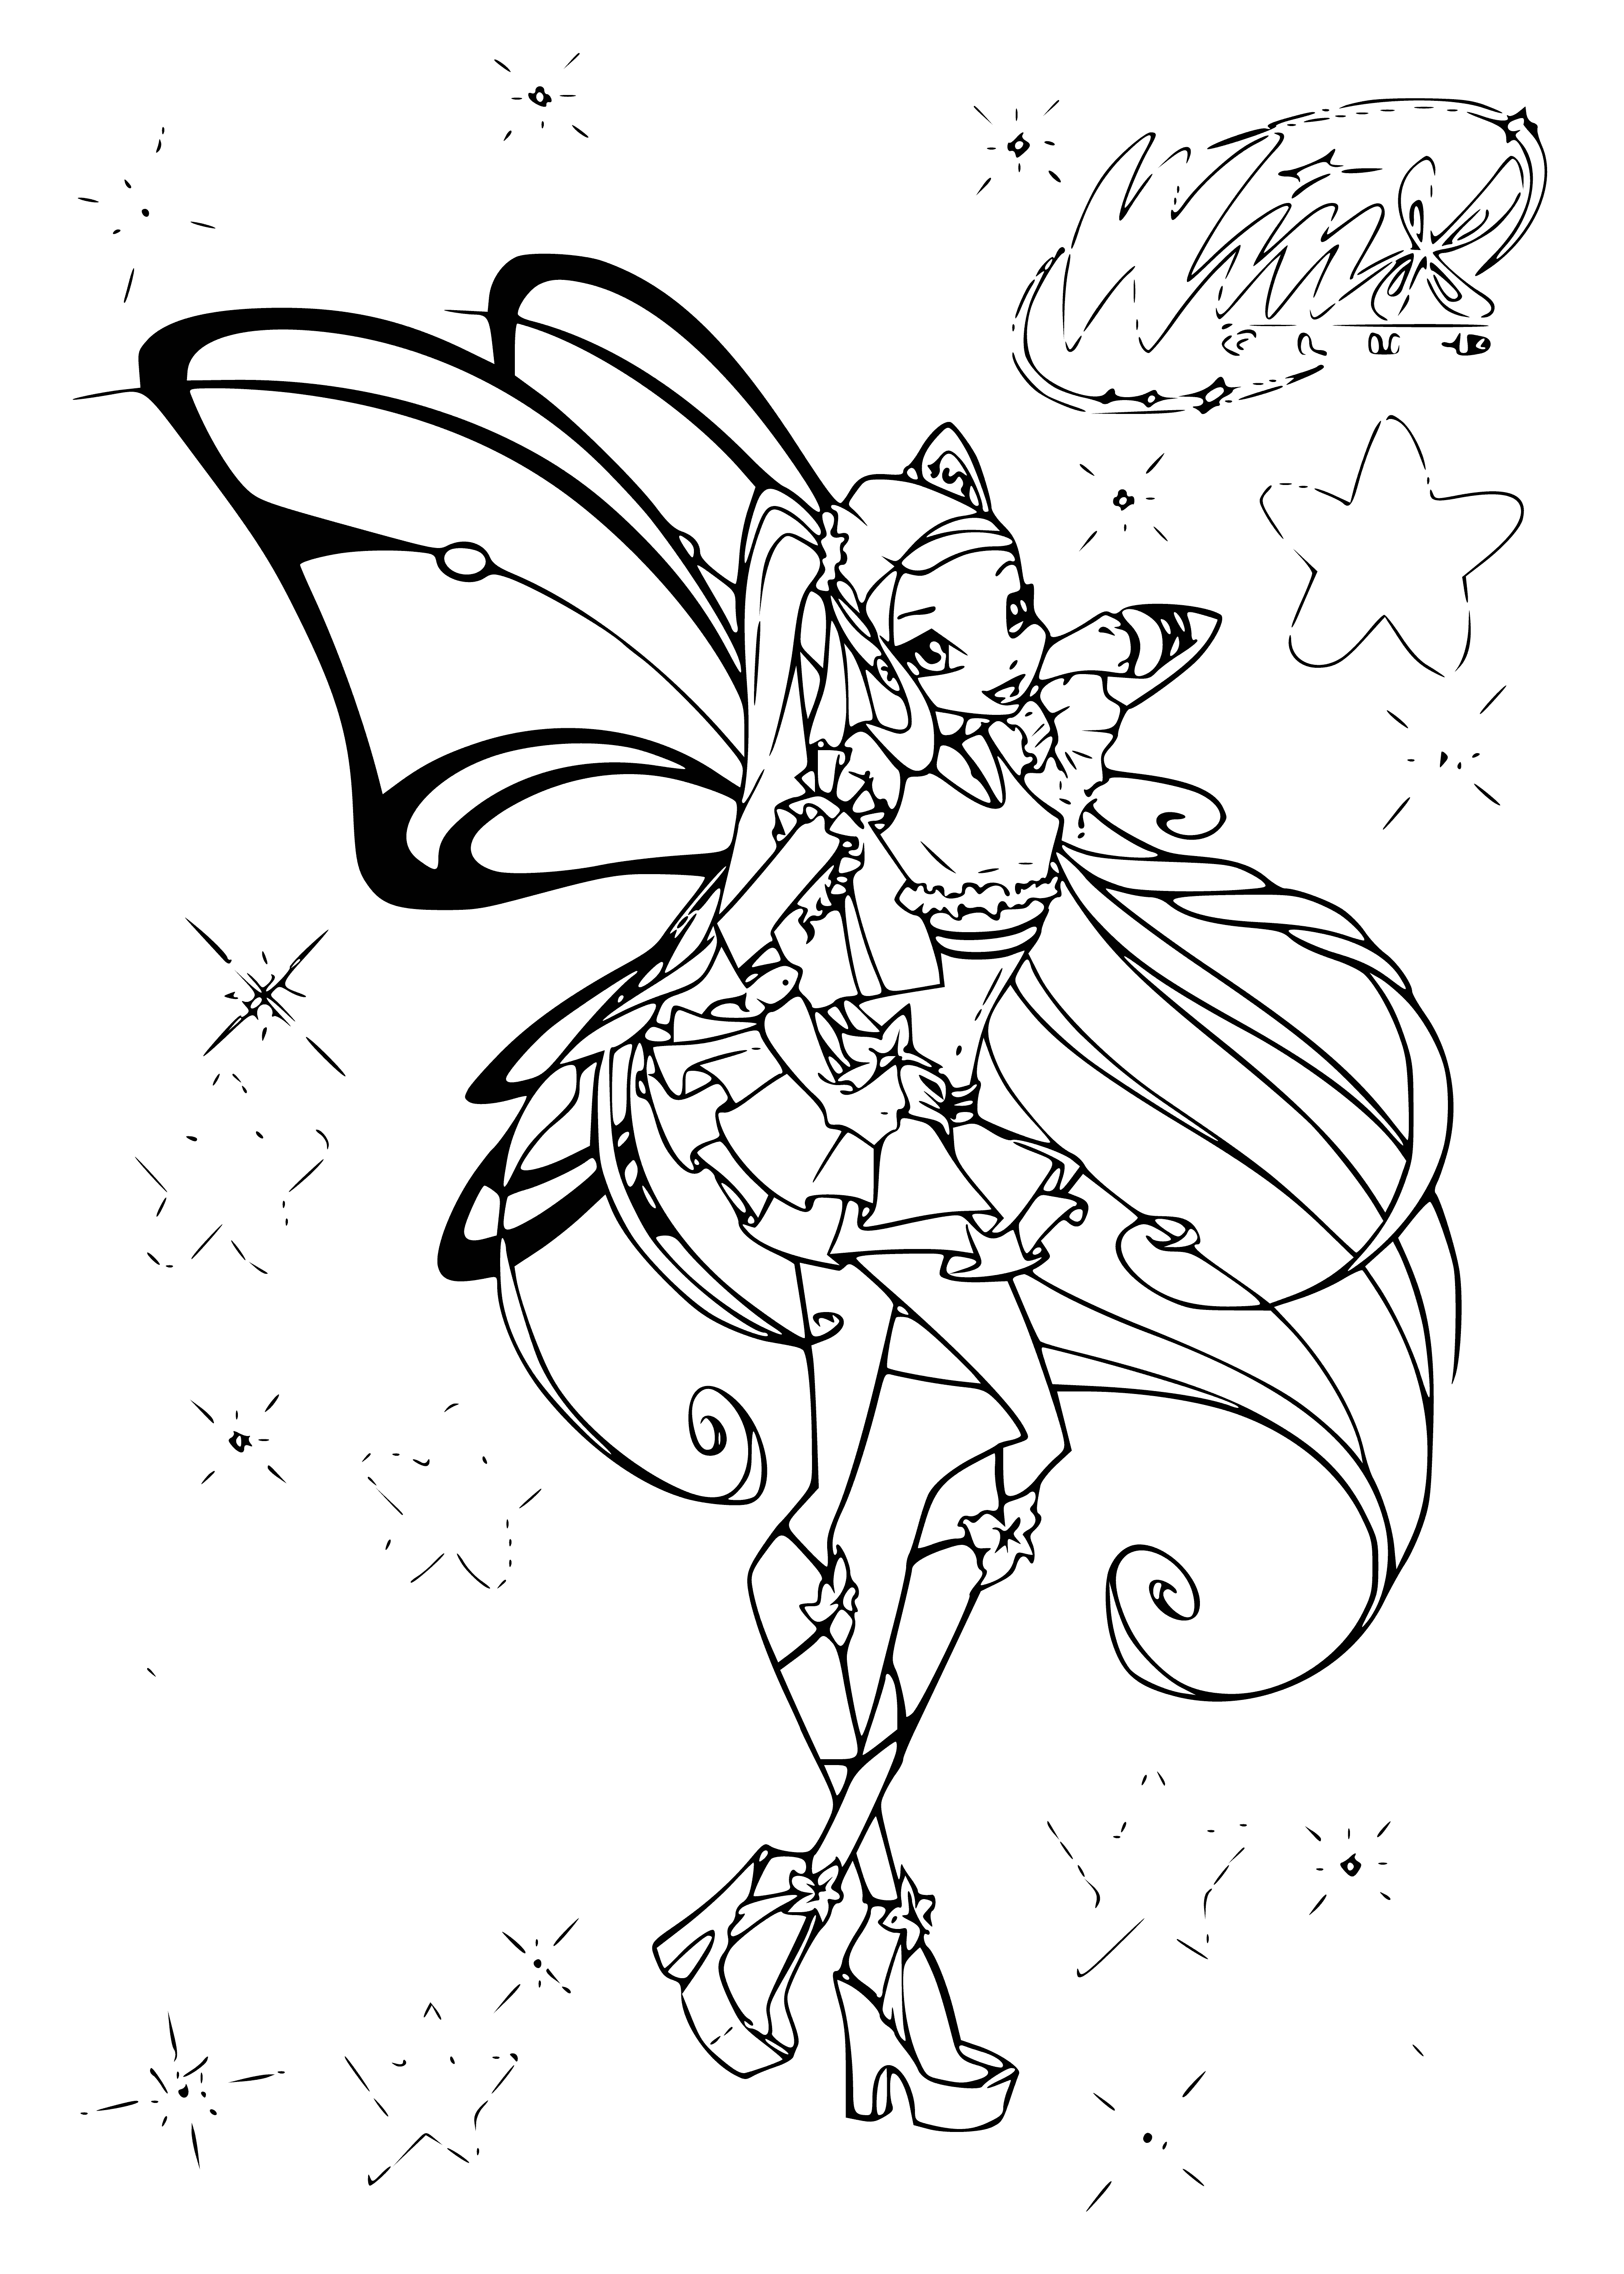 coloring page: Stella, a fairy with glittery wings, dress & wand with star-shaped end, sits atop a toadstool with blonde hair & blue eyes.